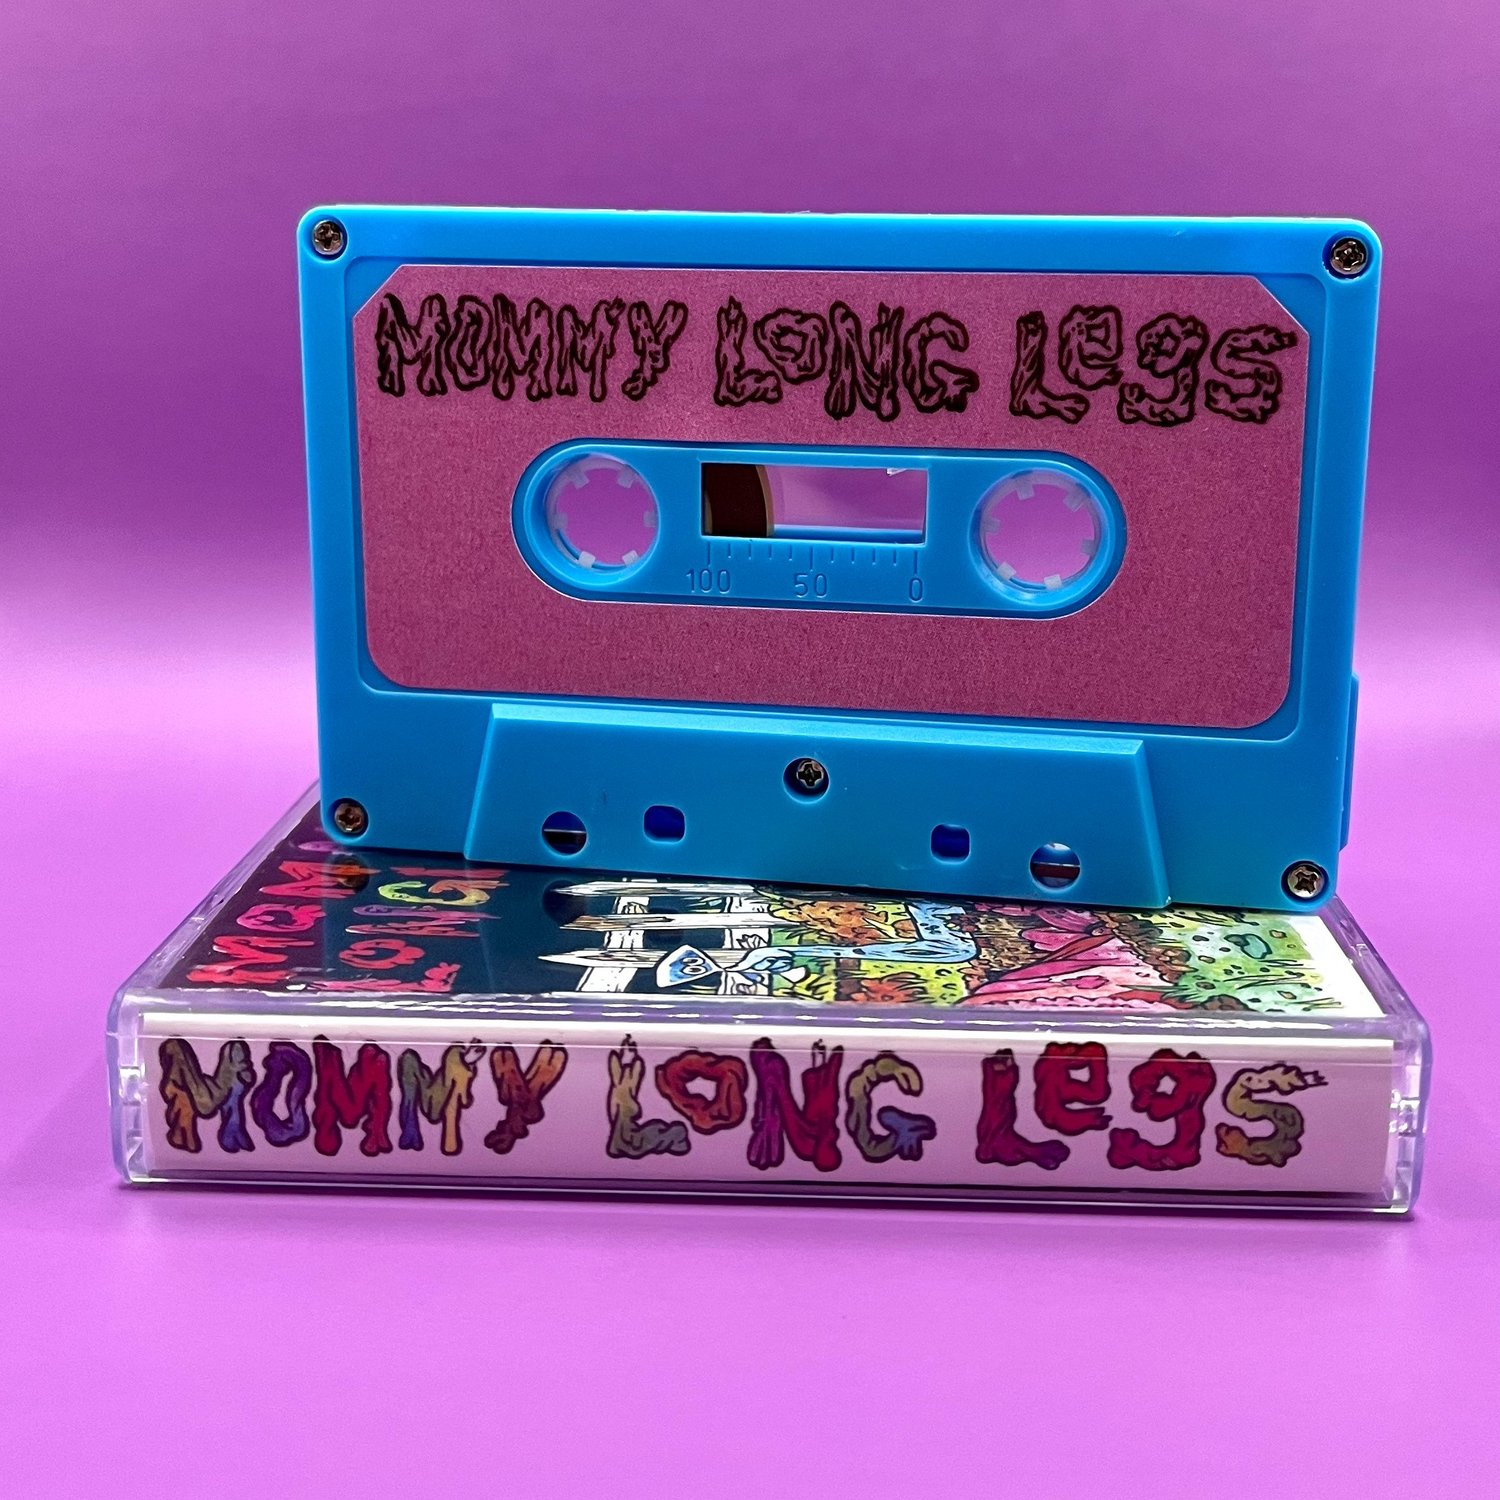 Mommy Long Legs - Try Your Best — Youth Riot Records